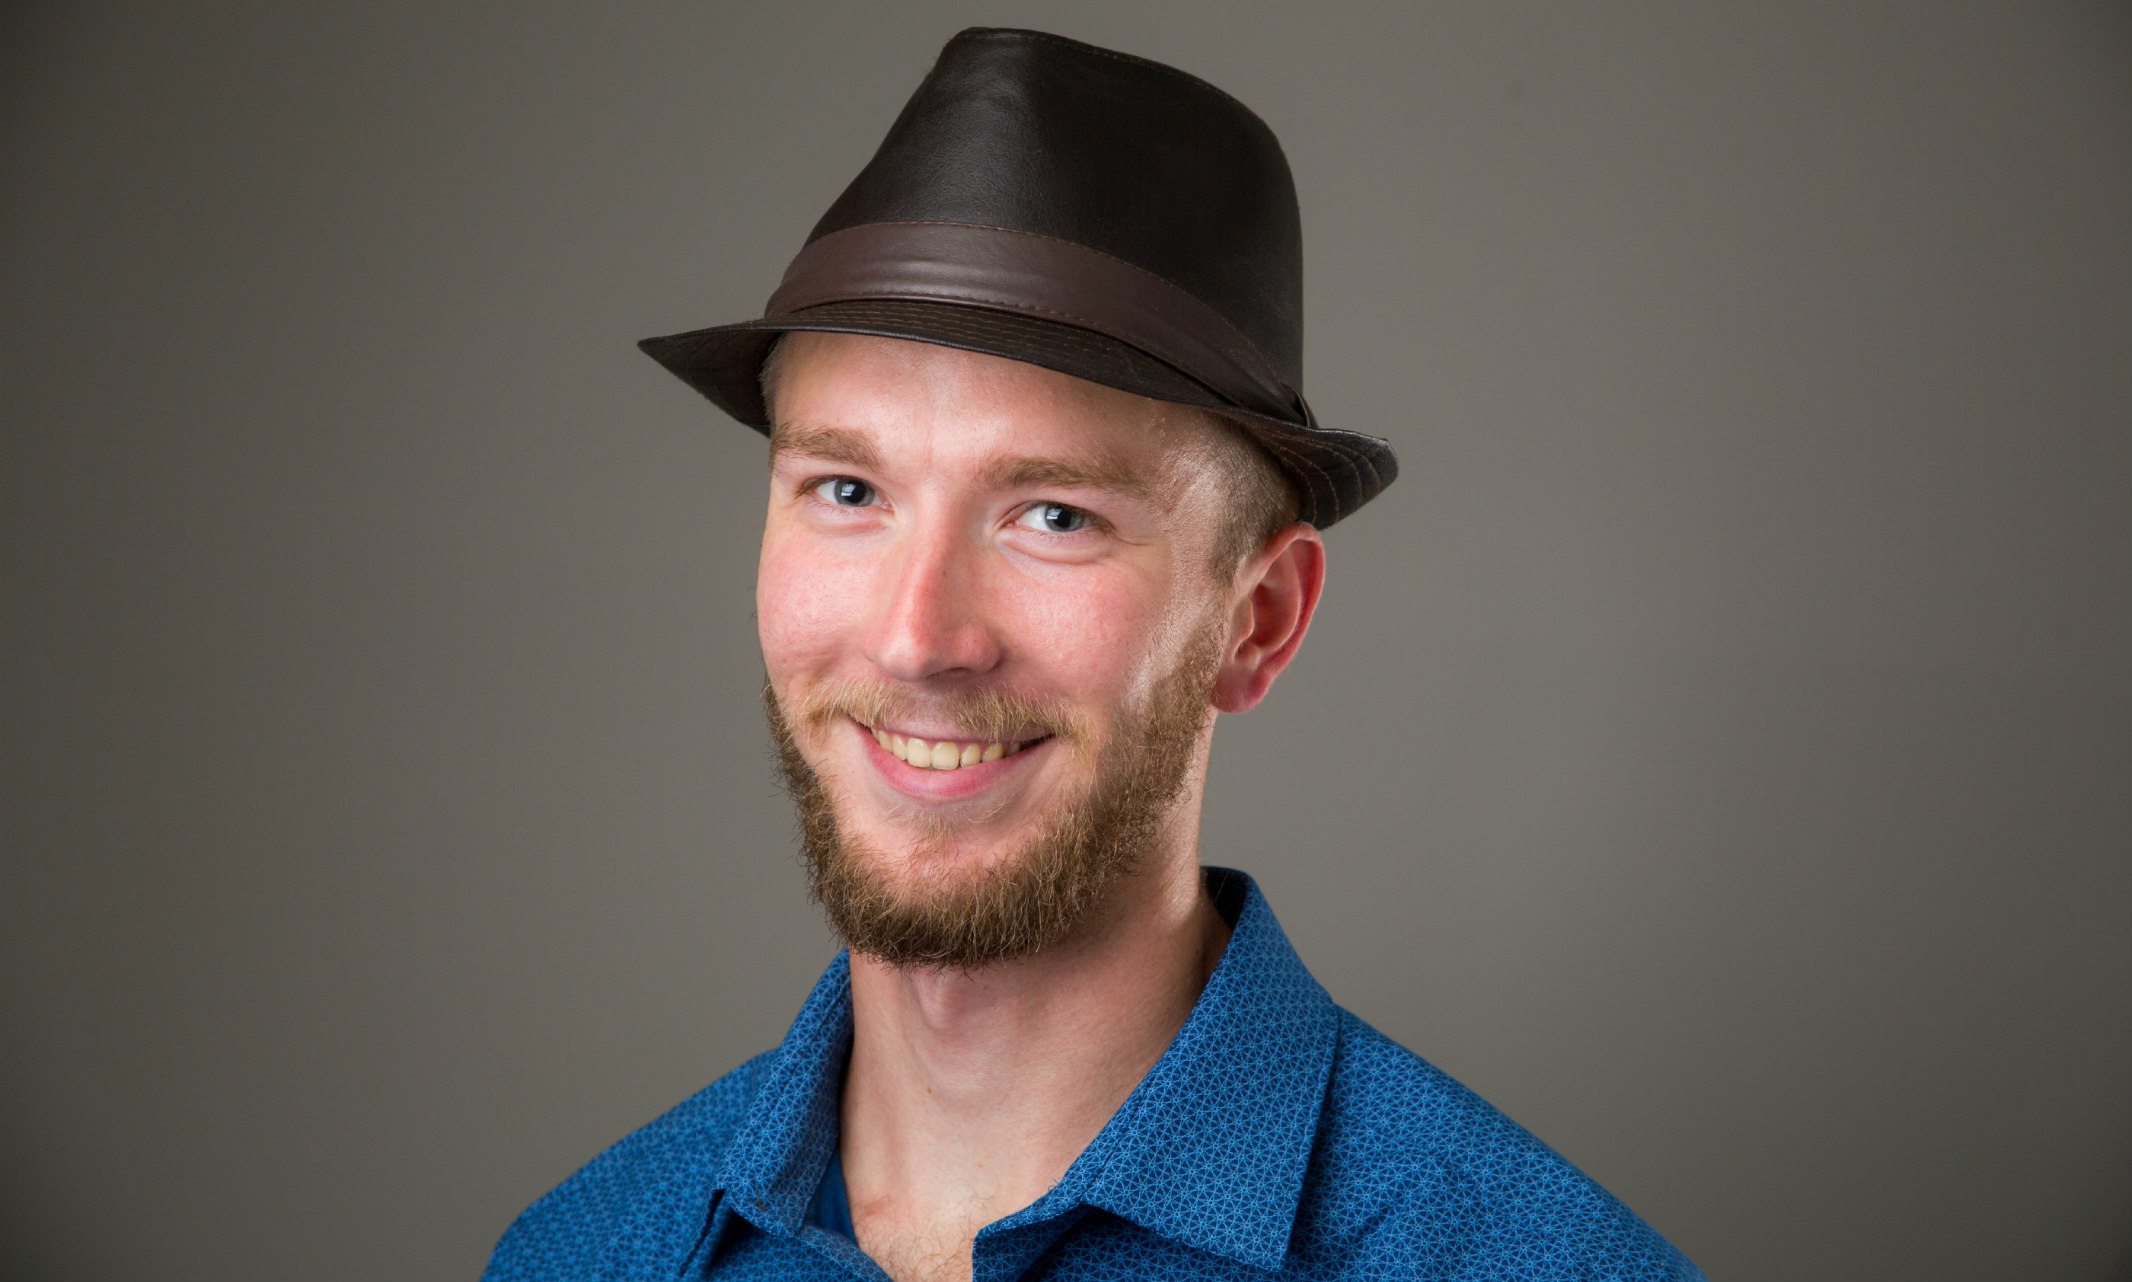 A portrait of student Brian Dieckman, who is wearing a hat